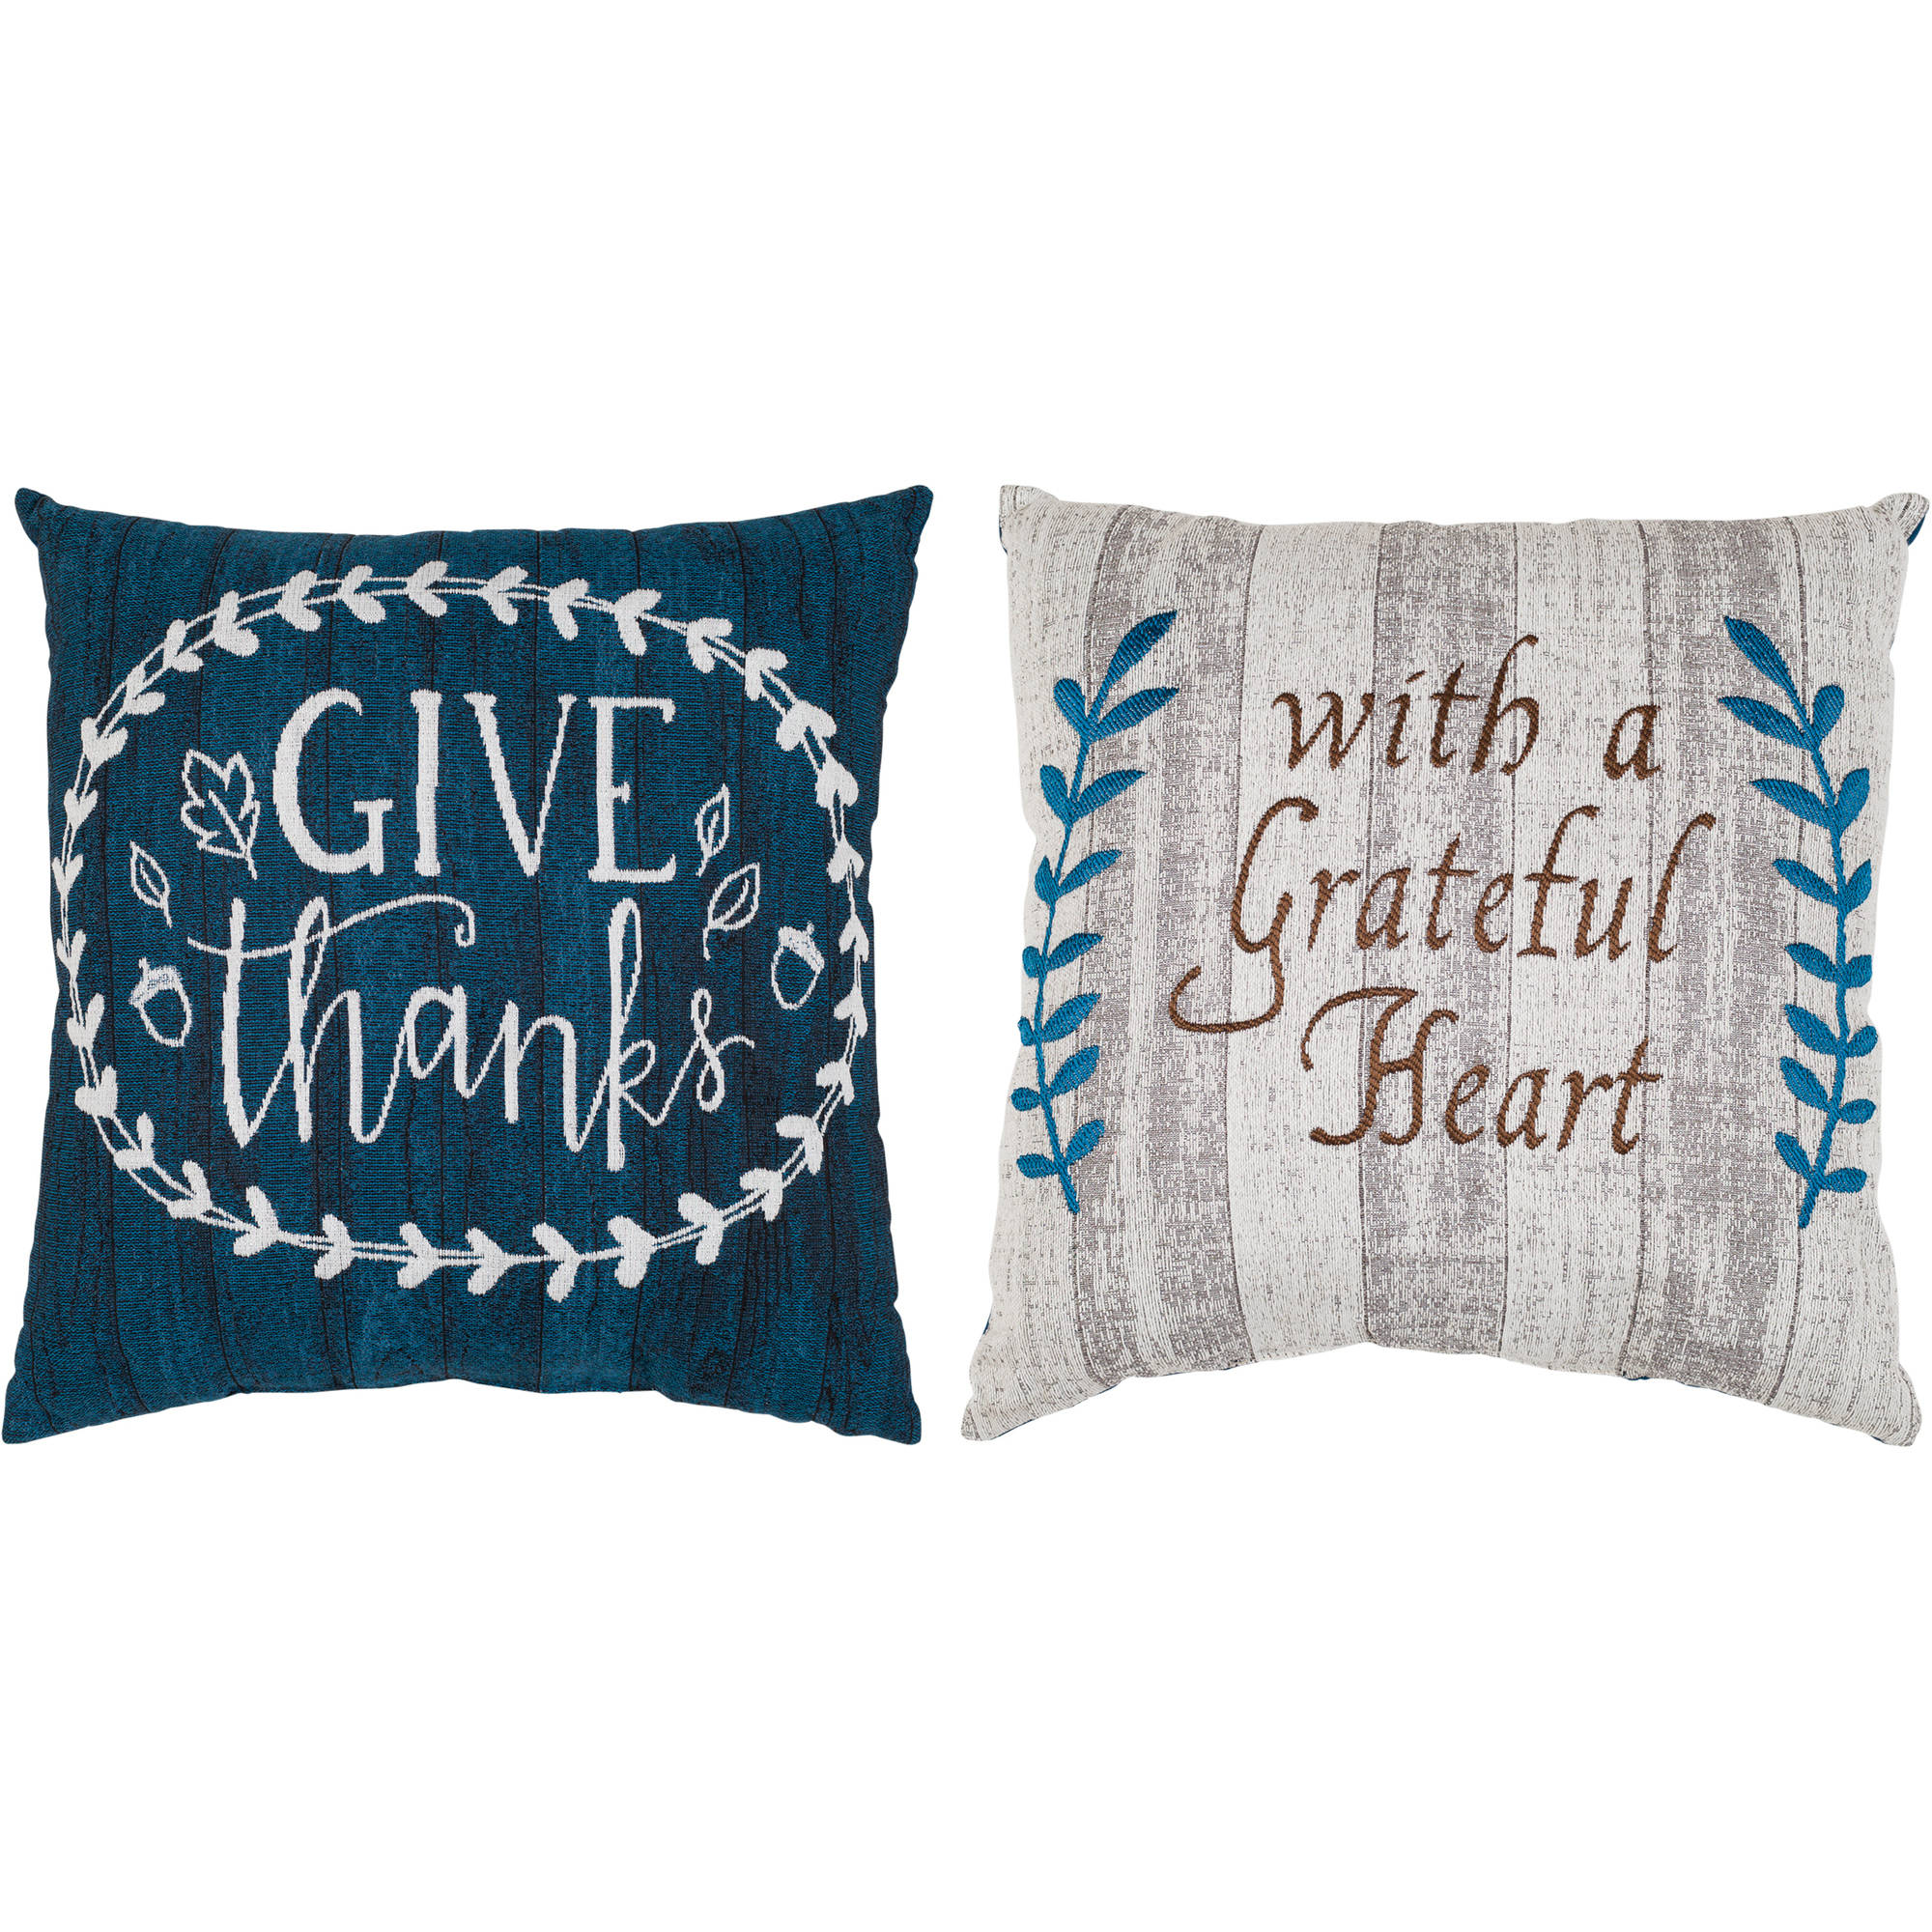 "Give Thanks" and "With a Grateful Heart" Decorative Throw Pillow, 2 Piece - image 1 of 1